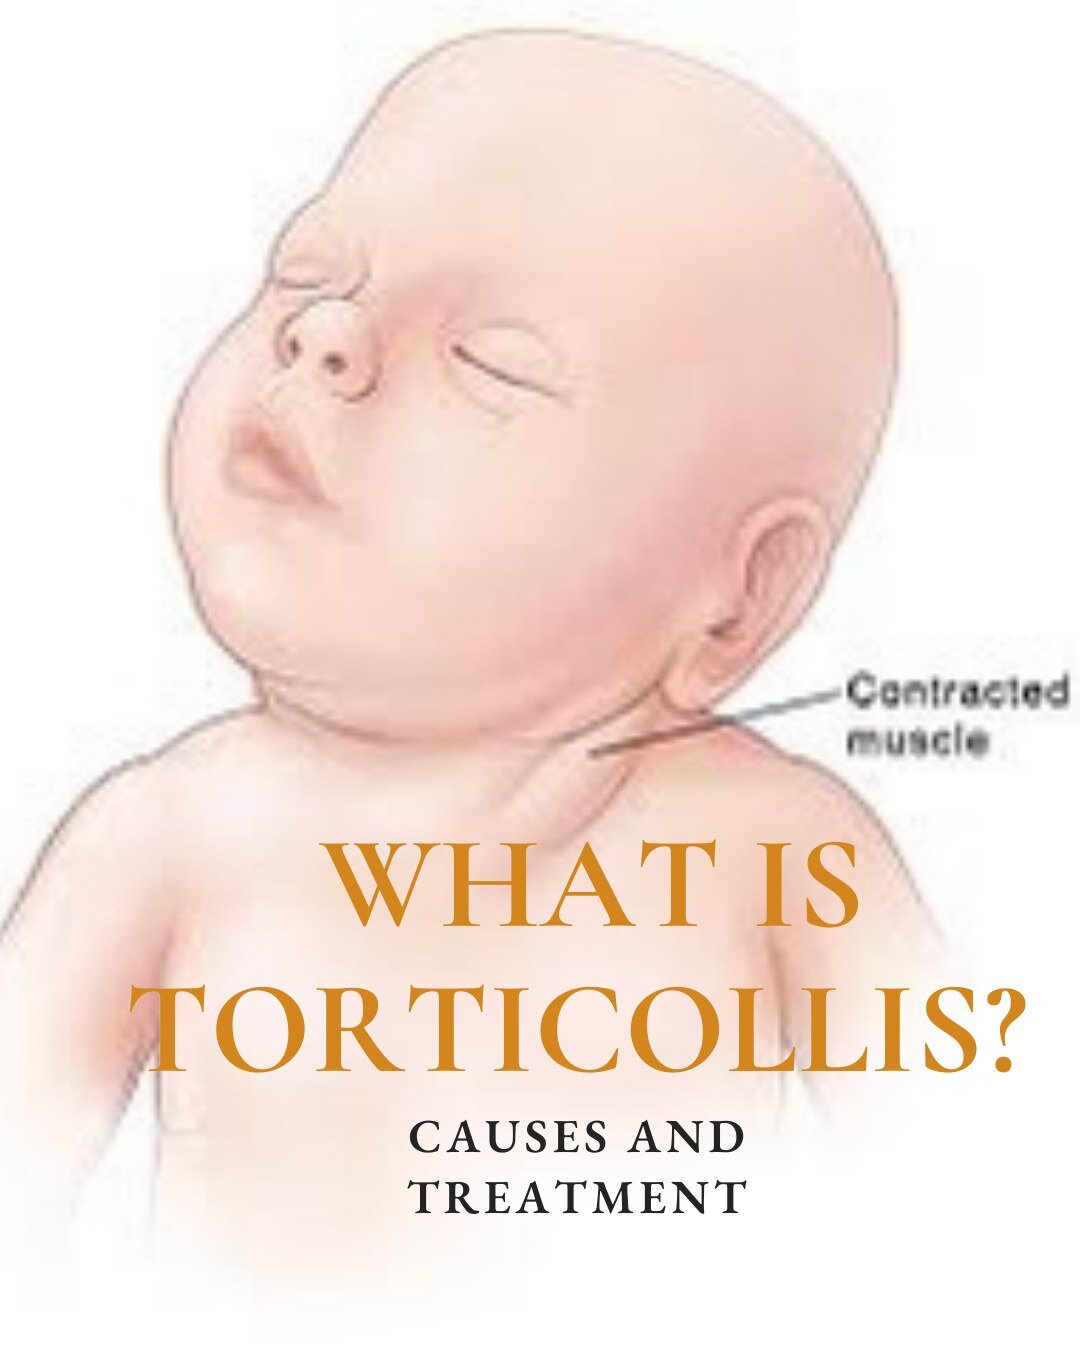 🌟 Understanding Torticollis in Babies 🌟
Did you know that babies can also experience torticollis? It's a condition where a baby's neck muscles tighten, causing their head to tilt to one side. It's more common than you might think, but with early de